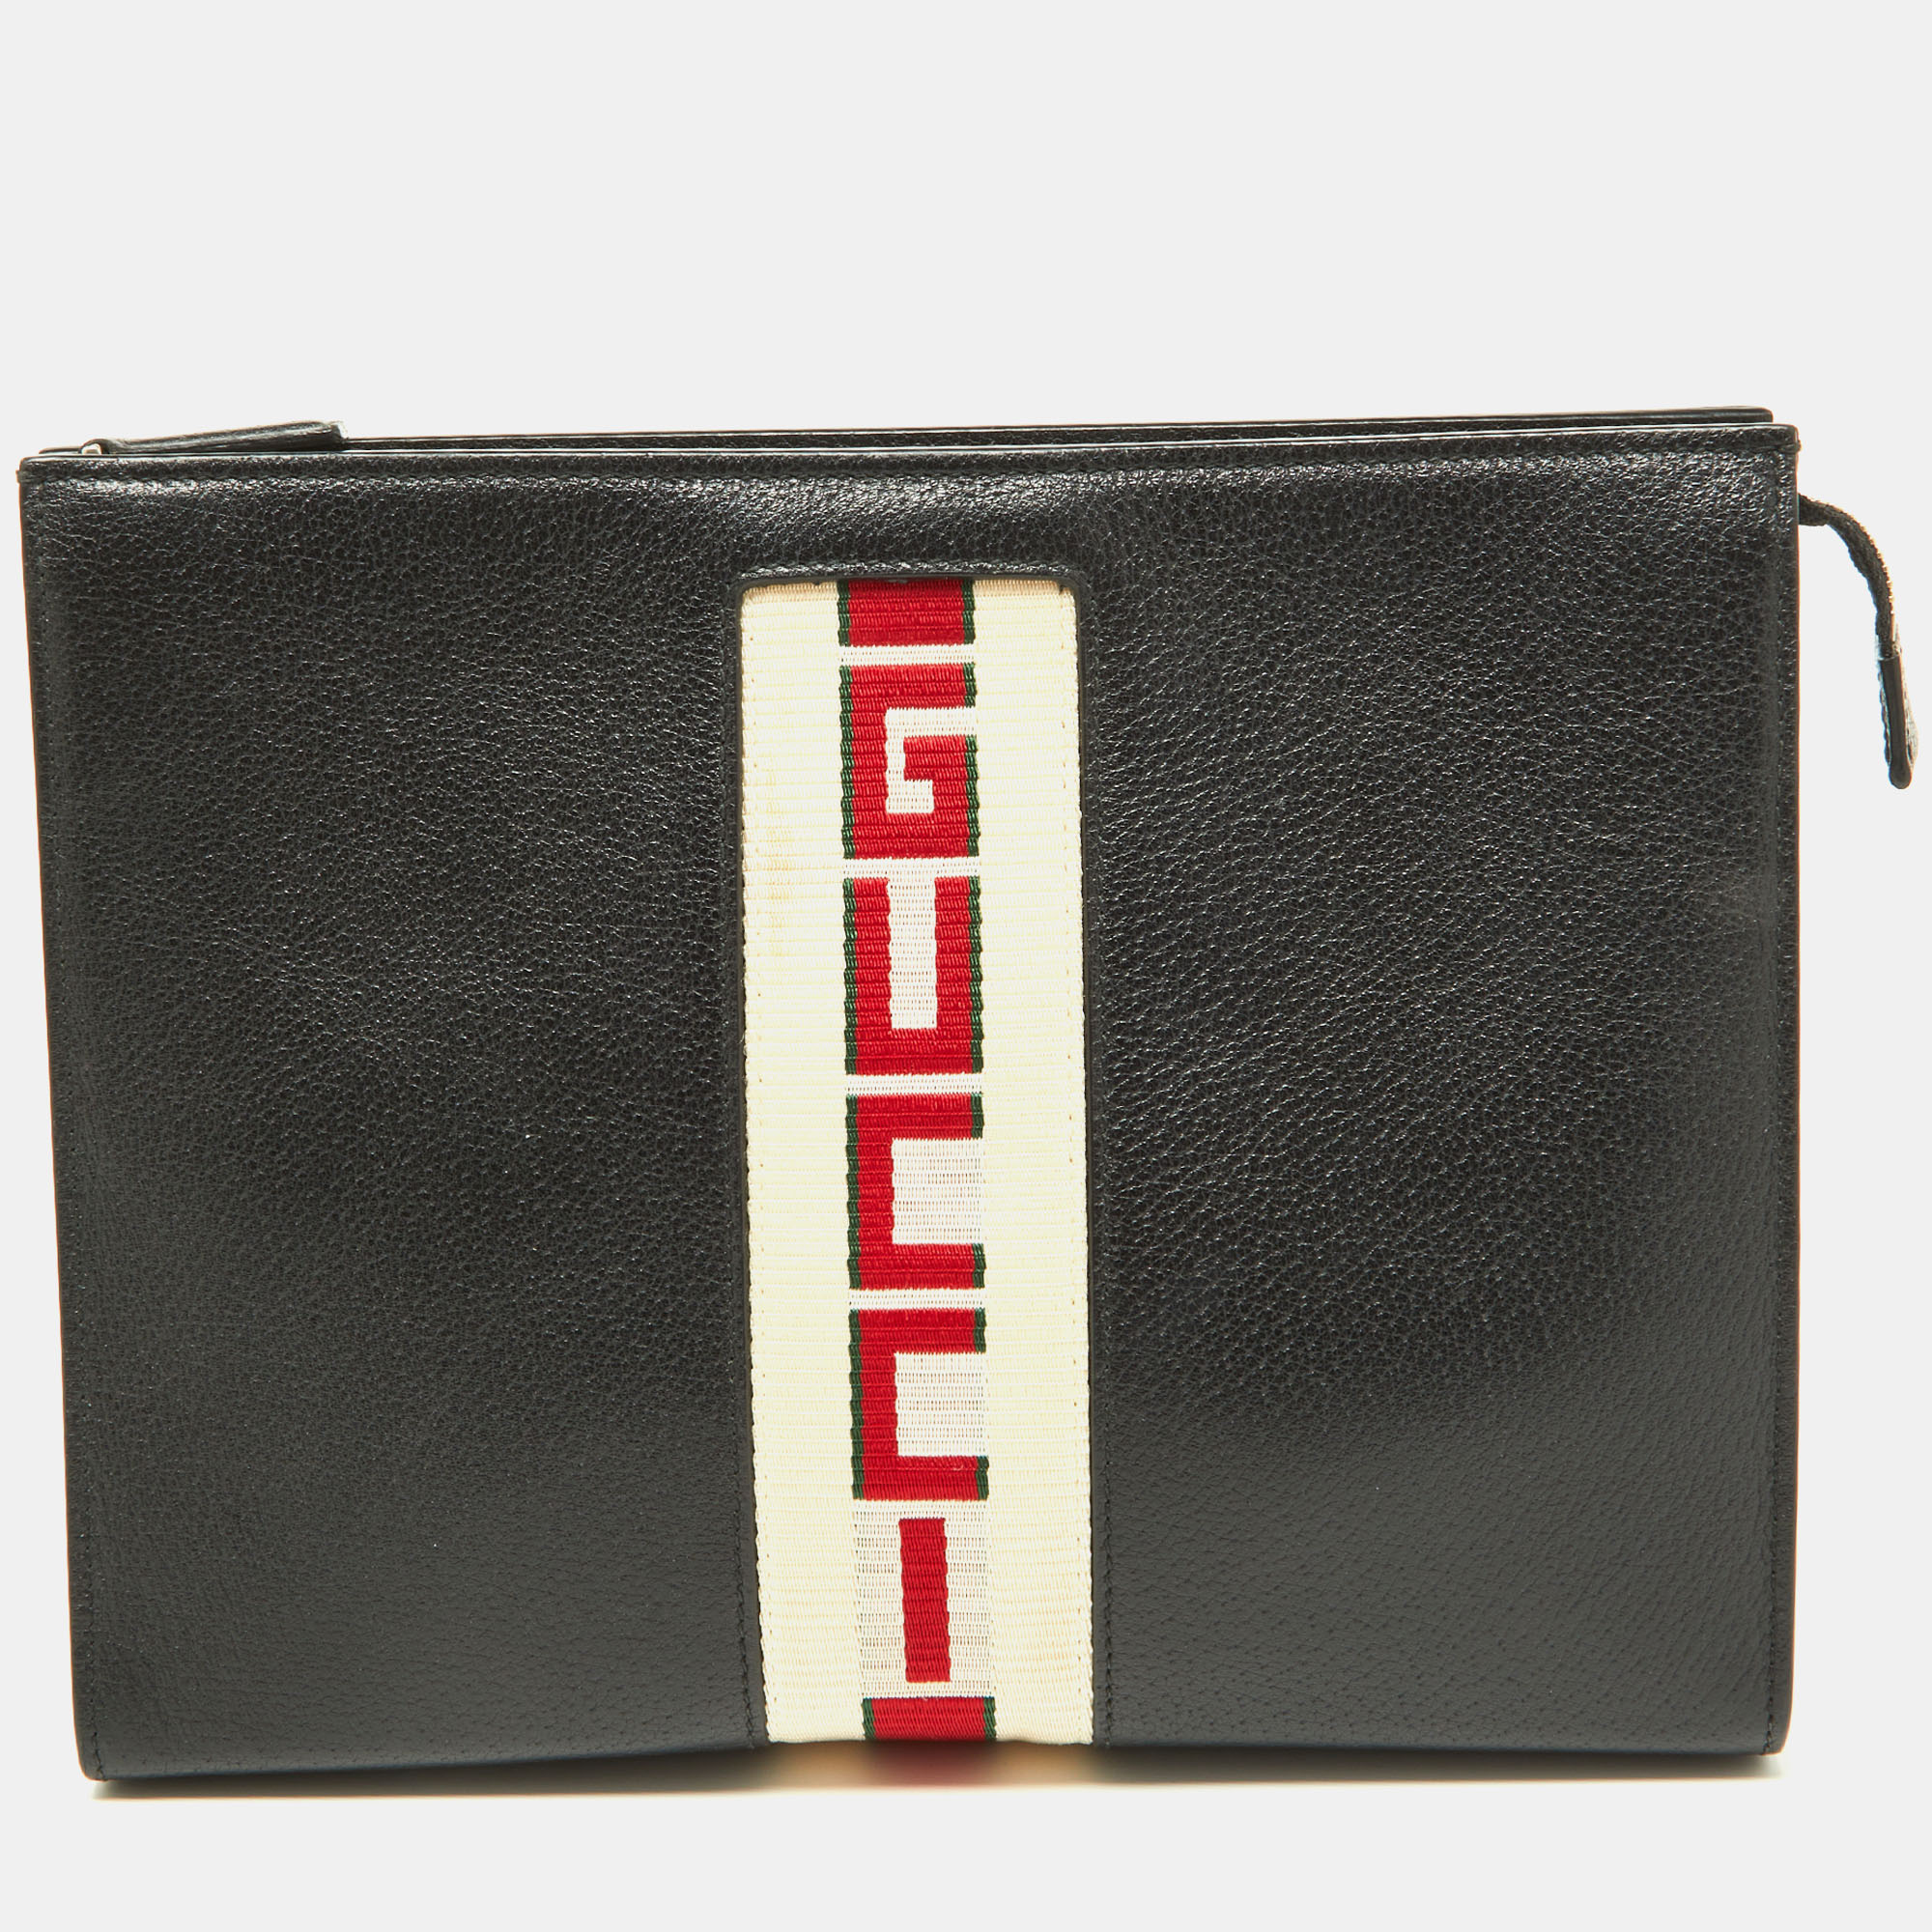 Gucci Black Leather Zip Pouch